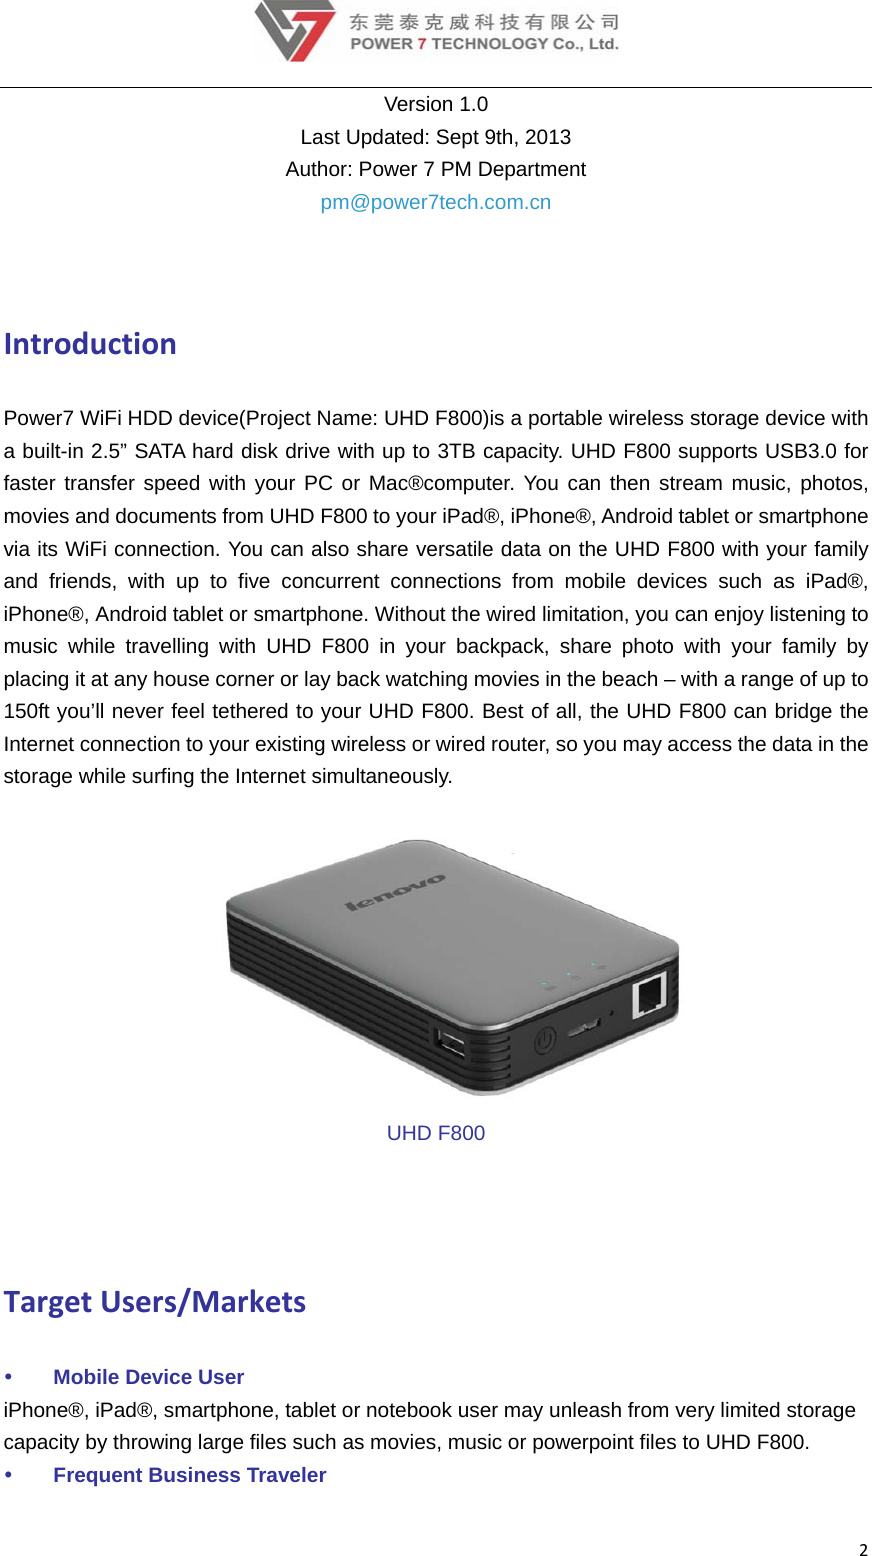 2Version 1.0 Last Updated: Sept 9th, 2013 Author: Power 7 PM Department pm@power7tech.com.cn  IntroductionPower7 WiFi HDD device(Project Name: UHD F800)is a portable wireless storage device with a built-in 2.5” SATA hard disk drive with up to 3TB capacity. UHD F800 supports USB3.0 for faster transfer speed with your PC or Mac®computer. You can then stream music, photos, movies and documents from UHD F800 to your iPad®, iPhone®, Android tablet or smartphone via its WiFi connection. You can also share versatile data on the UHD F800 with your family and friends, with up to five concurrent connections from mobile devices such as iPad®, iPhone®, Android tablet or smartphone. Without the wired limitation, you can enjoy listening to music while travelling with UHD F800 in your backpack, share photo with your family by placing it at any house corner or lay back watching movies in the beach – with a range of up to 150ft you’ll never feel tethered to your UHD F800. Best of all, the UHD F800 can bridge the Internet connection to your existing wireless or wired router, so you may access the data in the storage while surfing the Internet simultaneously.  UHD F800 TargetUsers/Markets Mobile Device User iPhone®, iPad®, smartphone, tablet or notebook user may unleash from very limited storage capacity by throwing large files such as movies, music or powerpoint files to UHD F800.  Frequent Business Traveler 